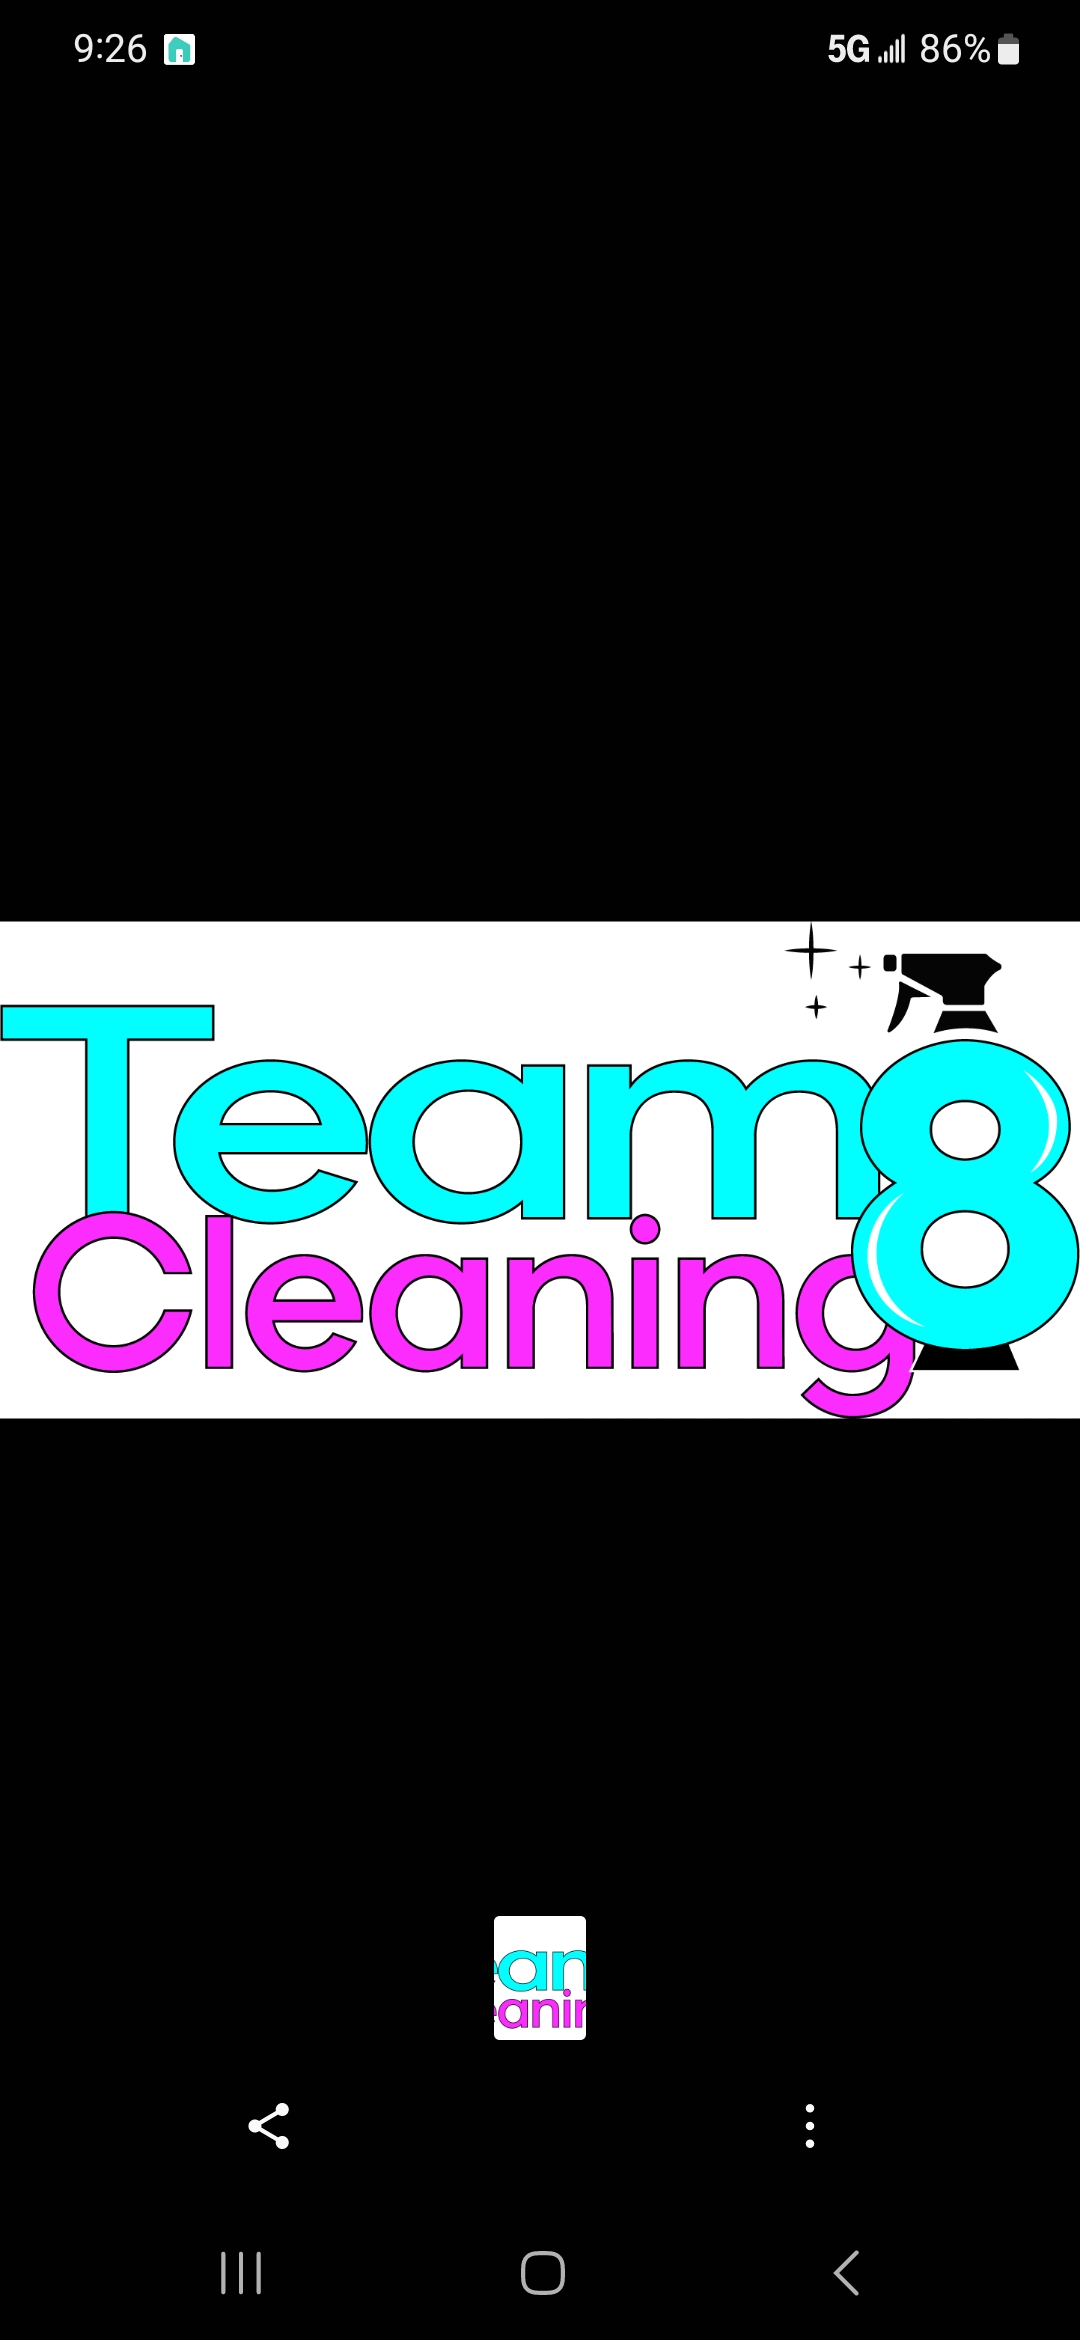 A&G Cleaning Services Logo